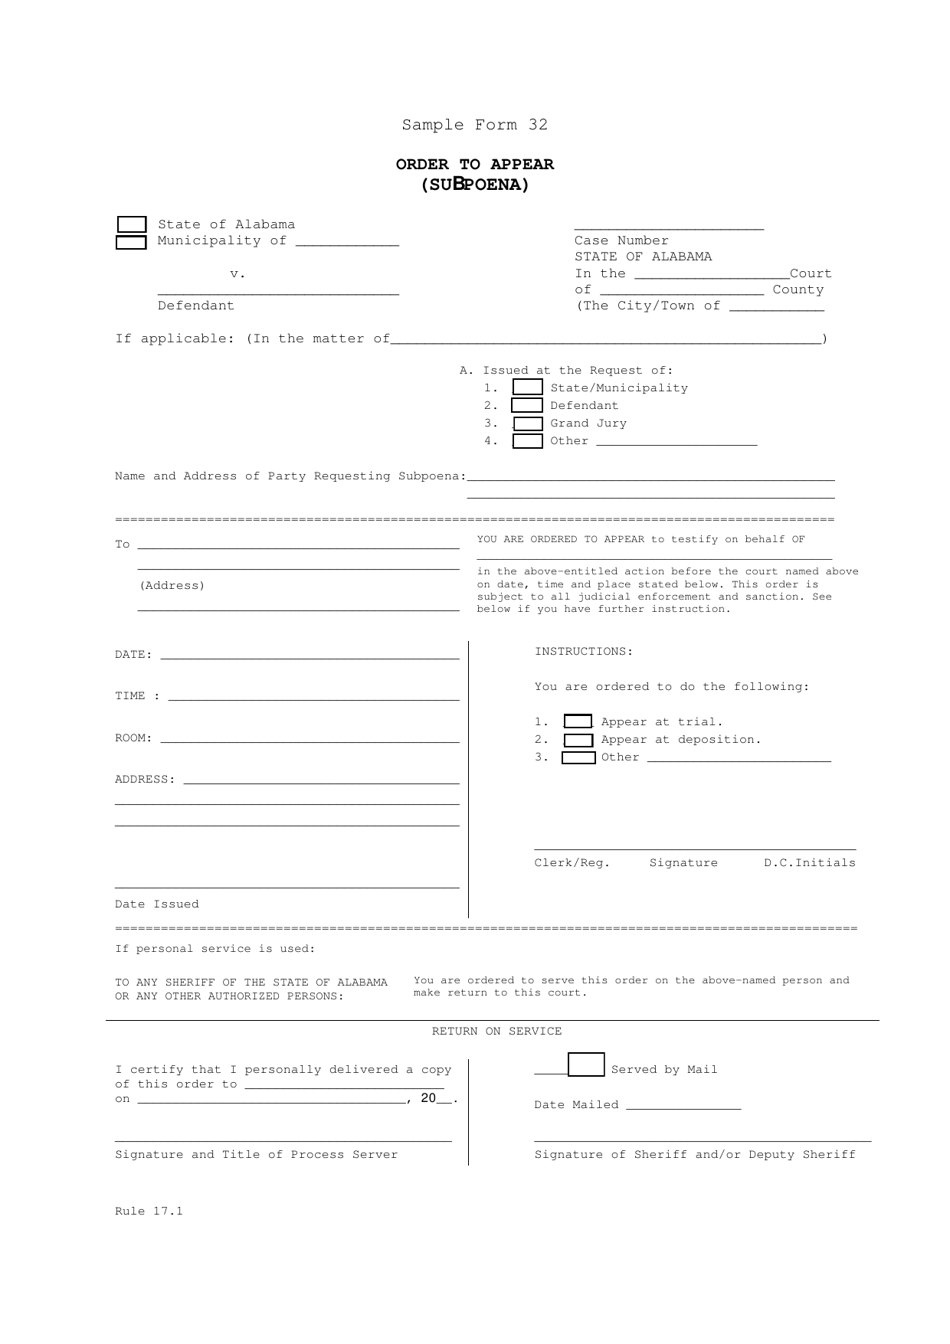 Sample Form 32 Order to Appear (Subpoena) - Alabama, Page 1